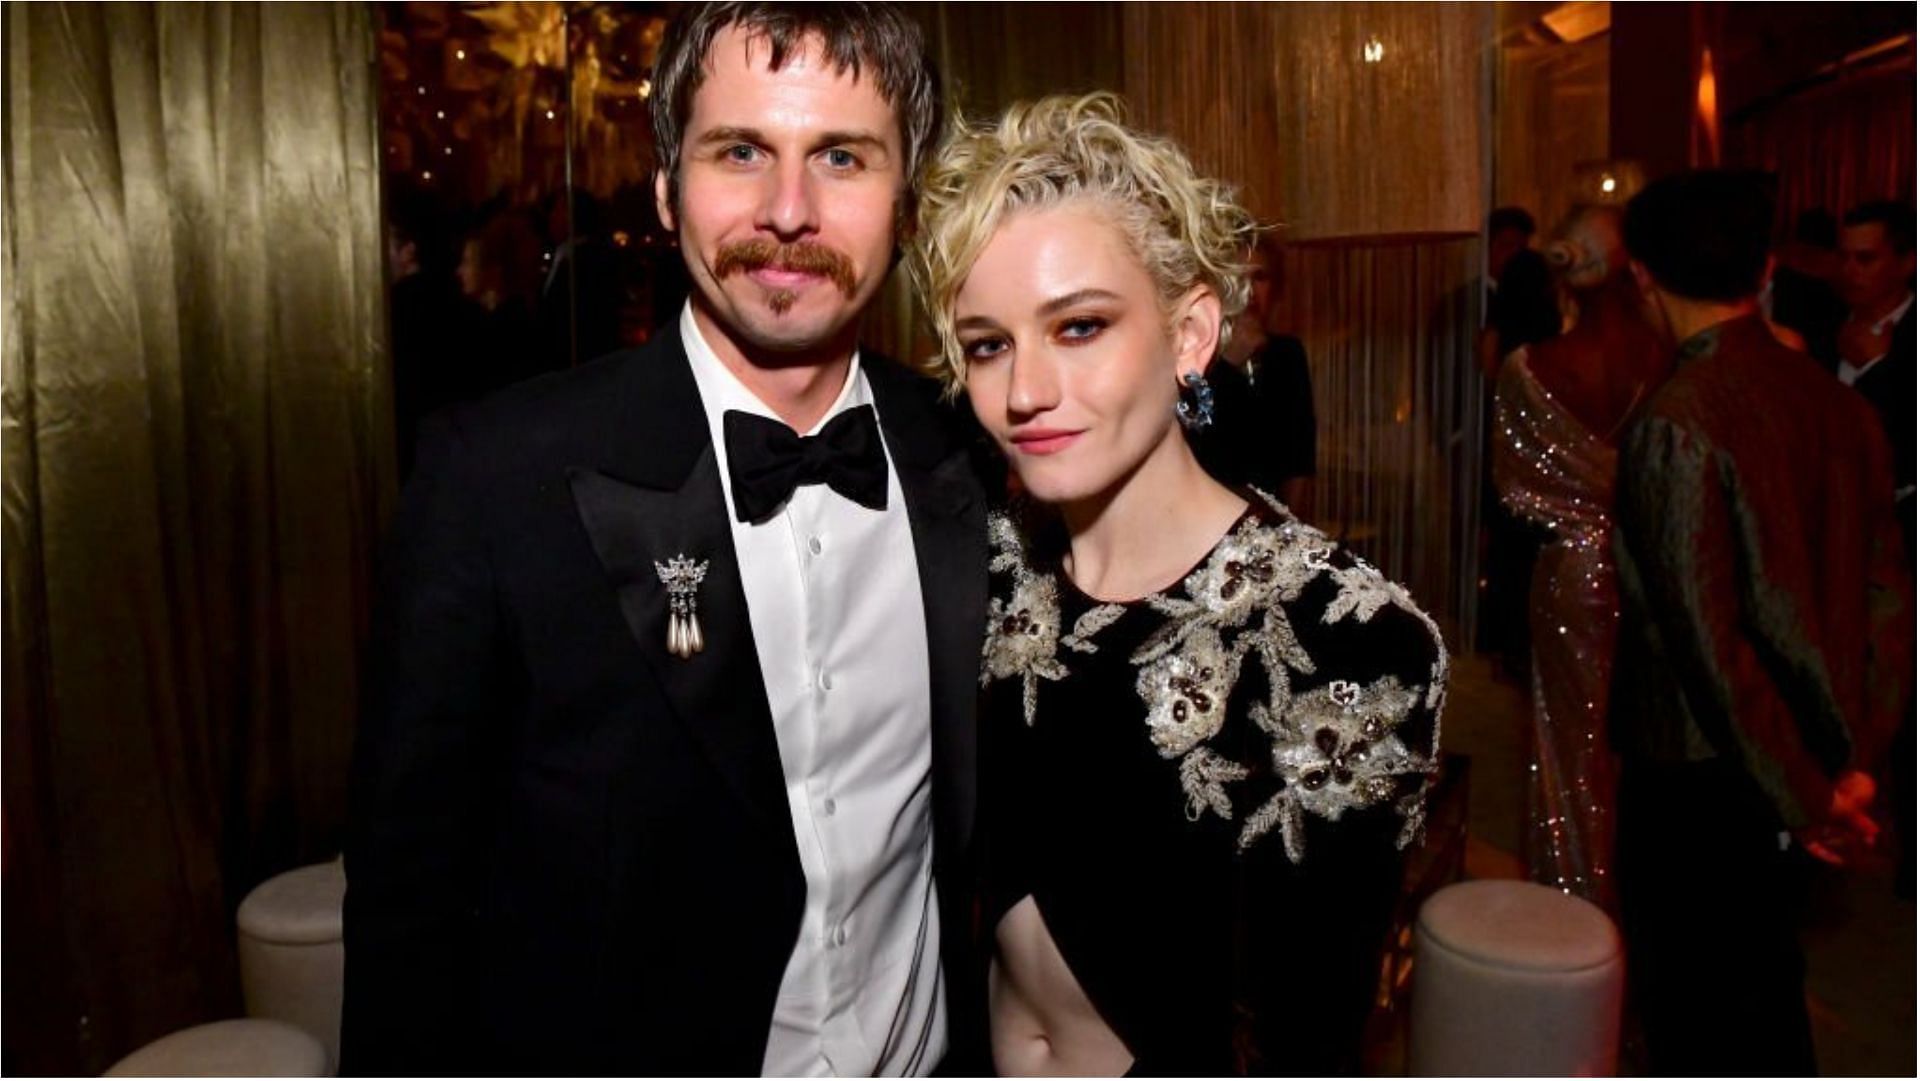 Julia Garner shared a throwback picture from her wedding with Mark Foster during their 3rd anniversary (Image via Jerod Harris/Getty Images)